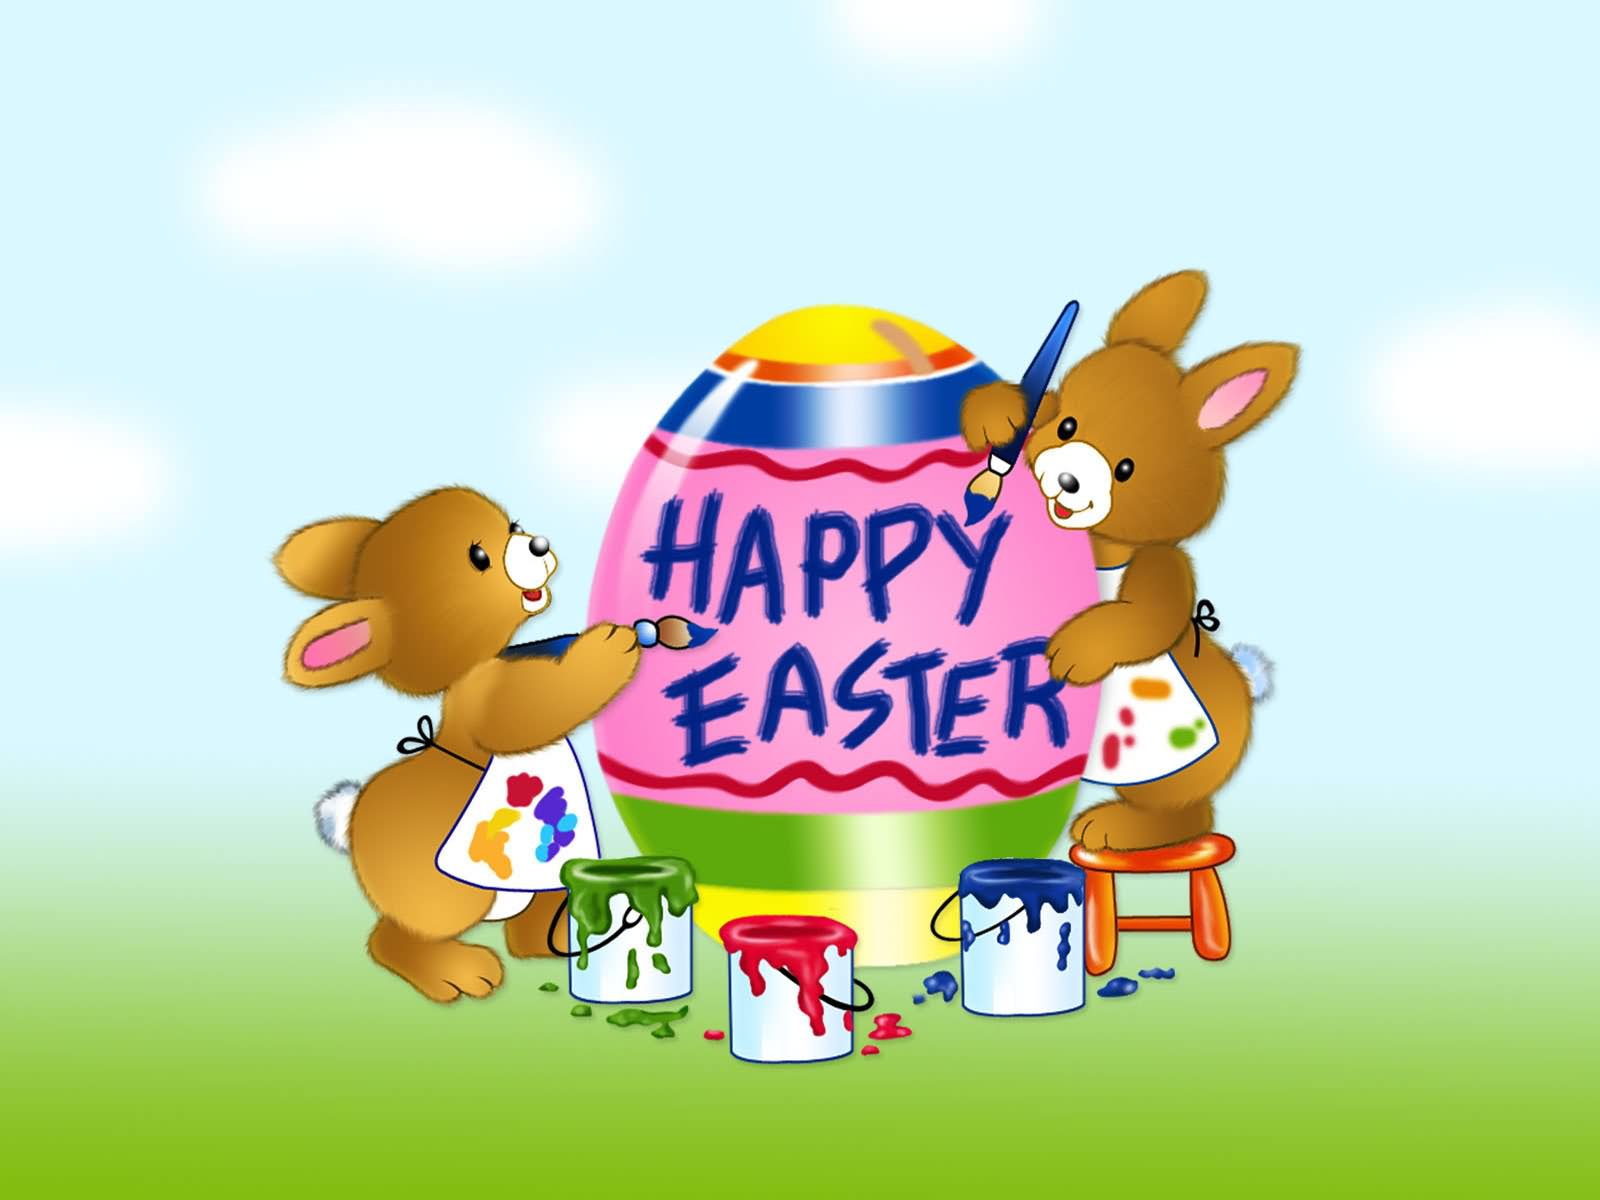 Happy Easter Bunnies Painting Egg Picture